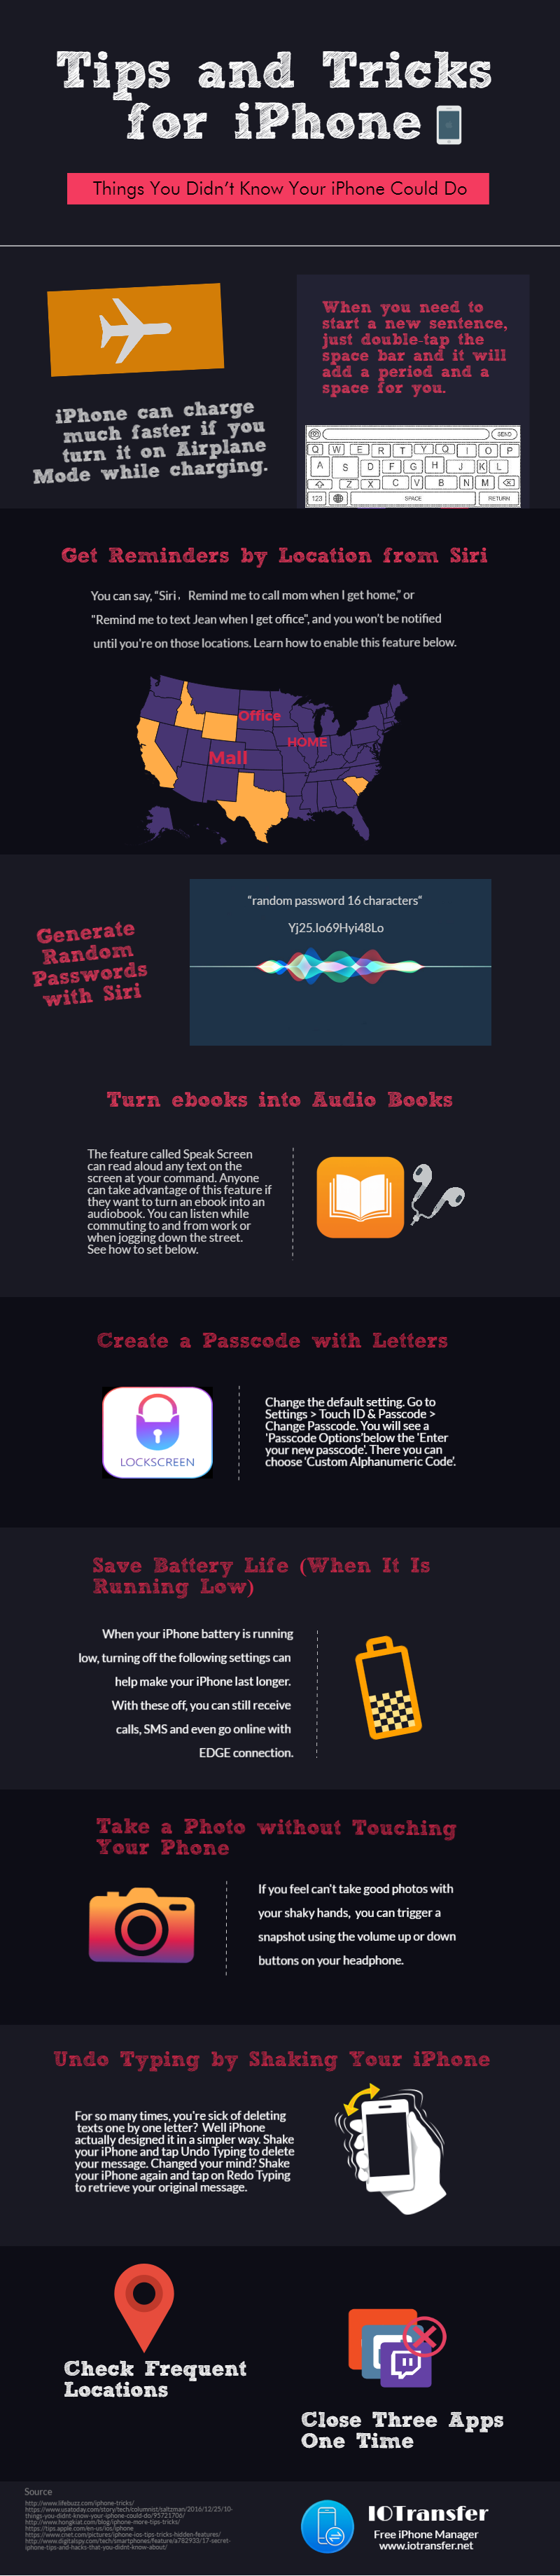 iPhone tips and tricks infographic